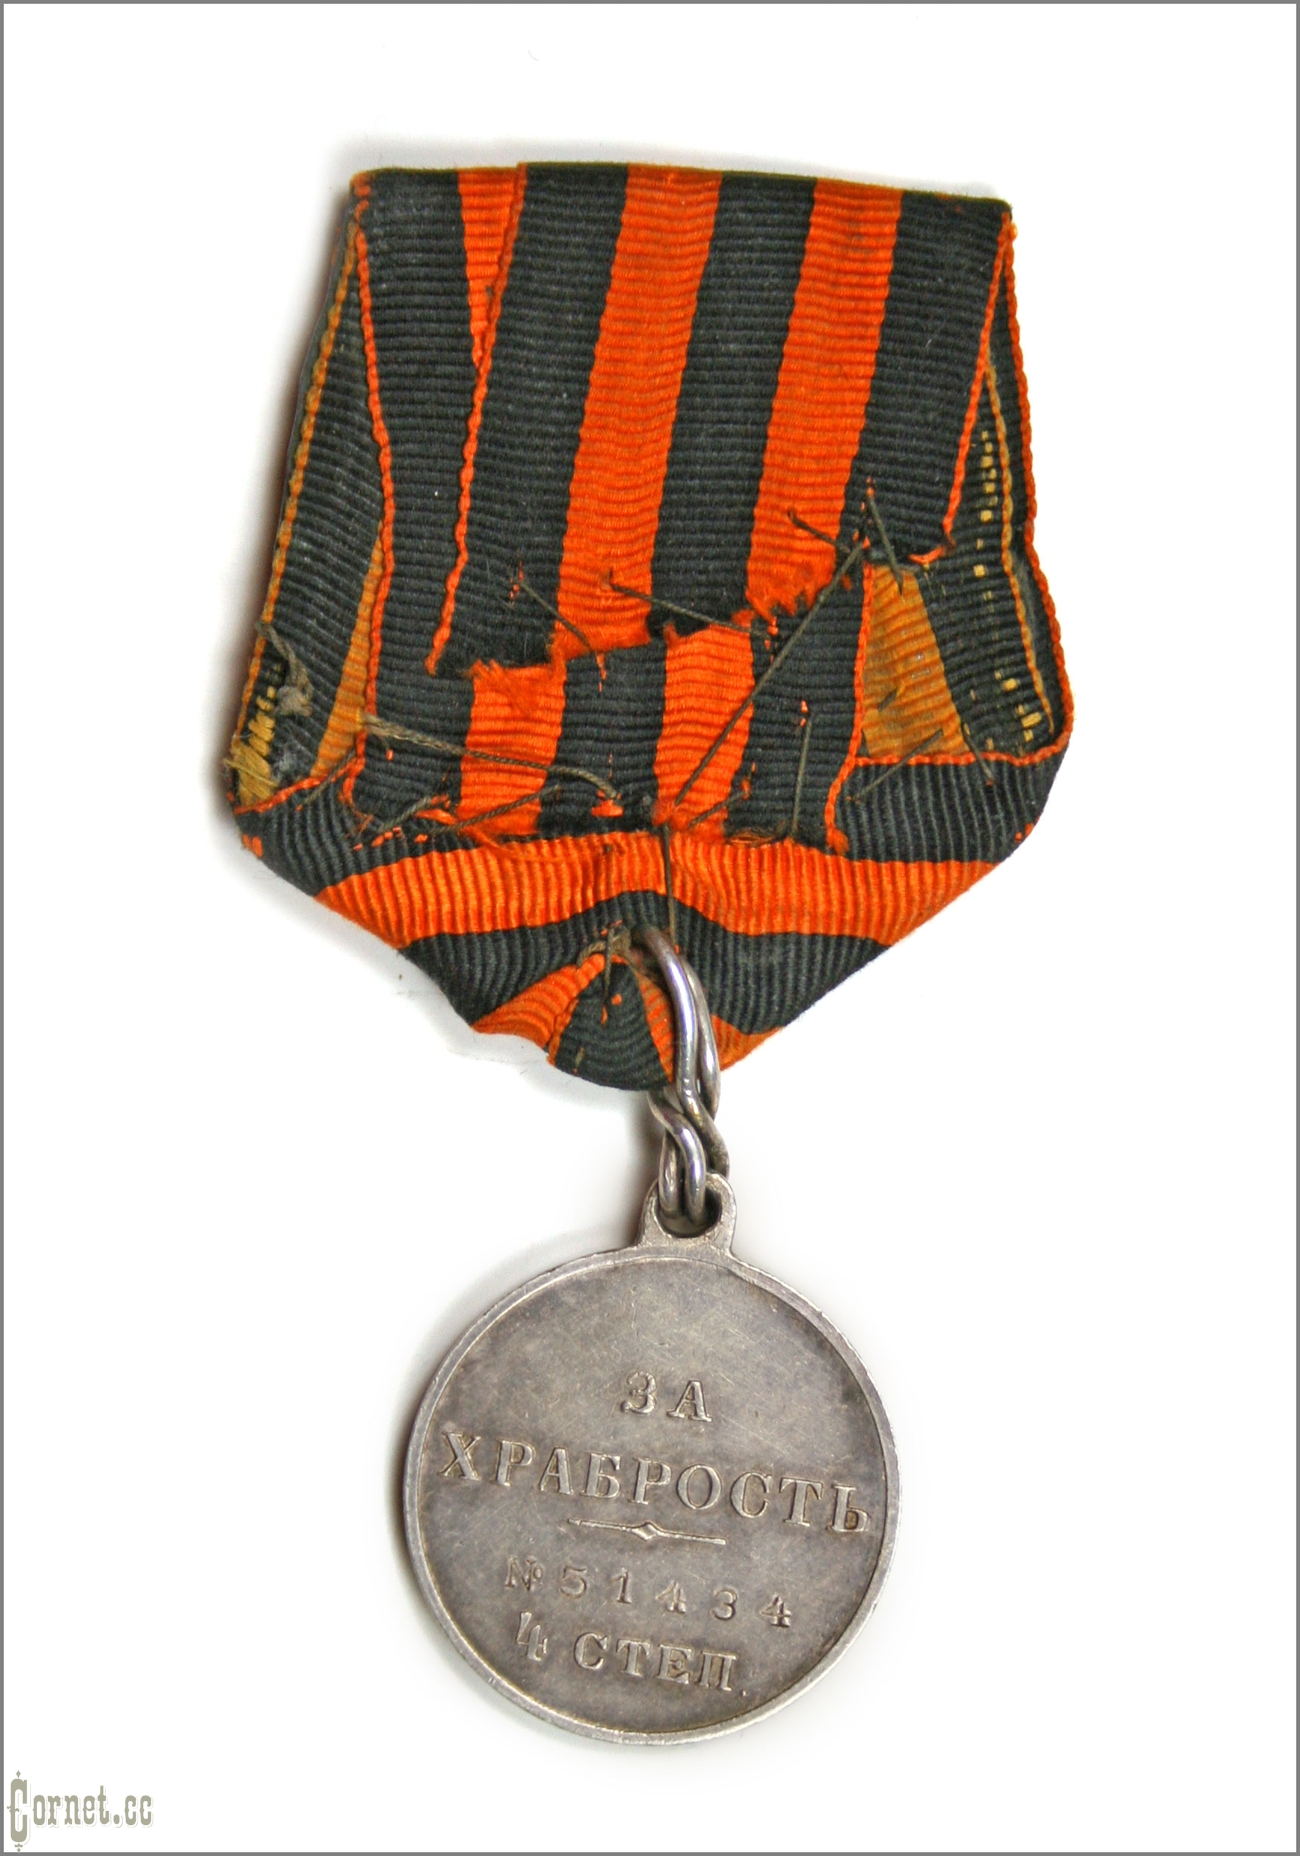 Medal "For bravery" 4 class